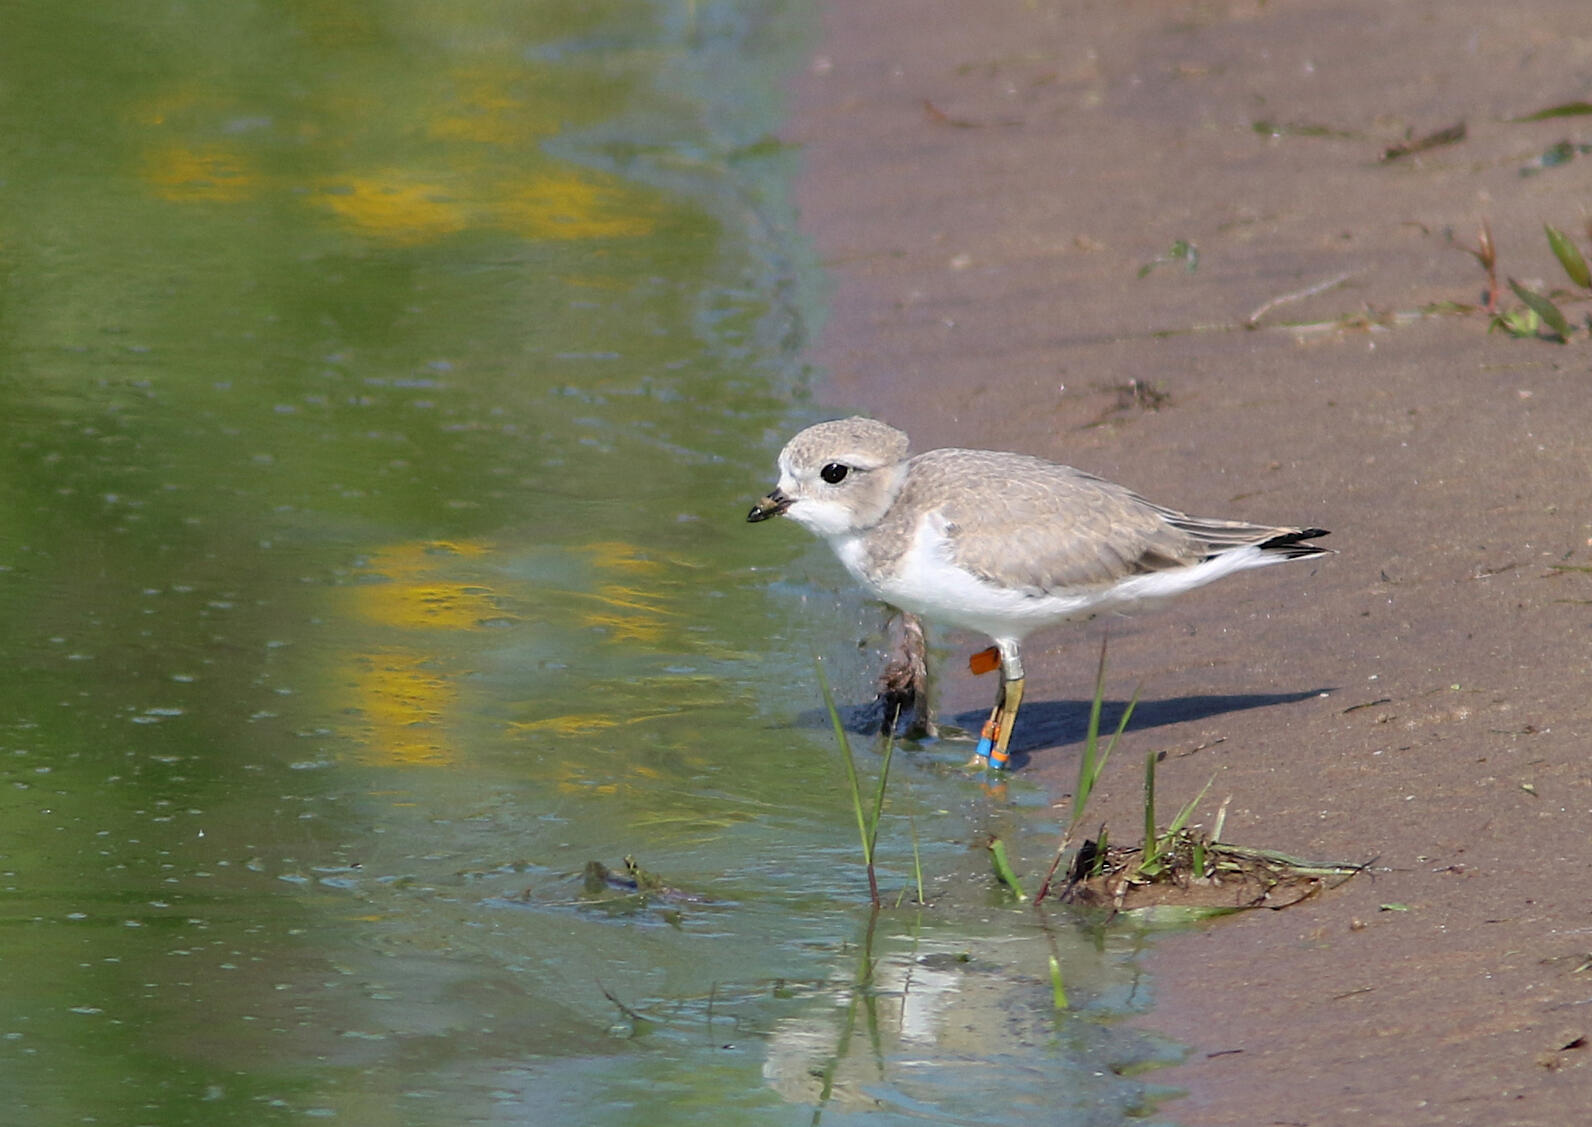 A 28-day-old piping plover chick that was released at Cat Islands.